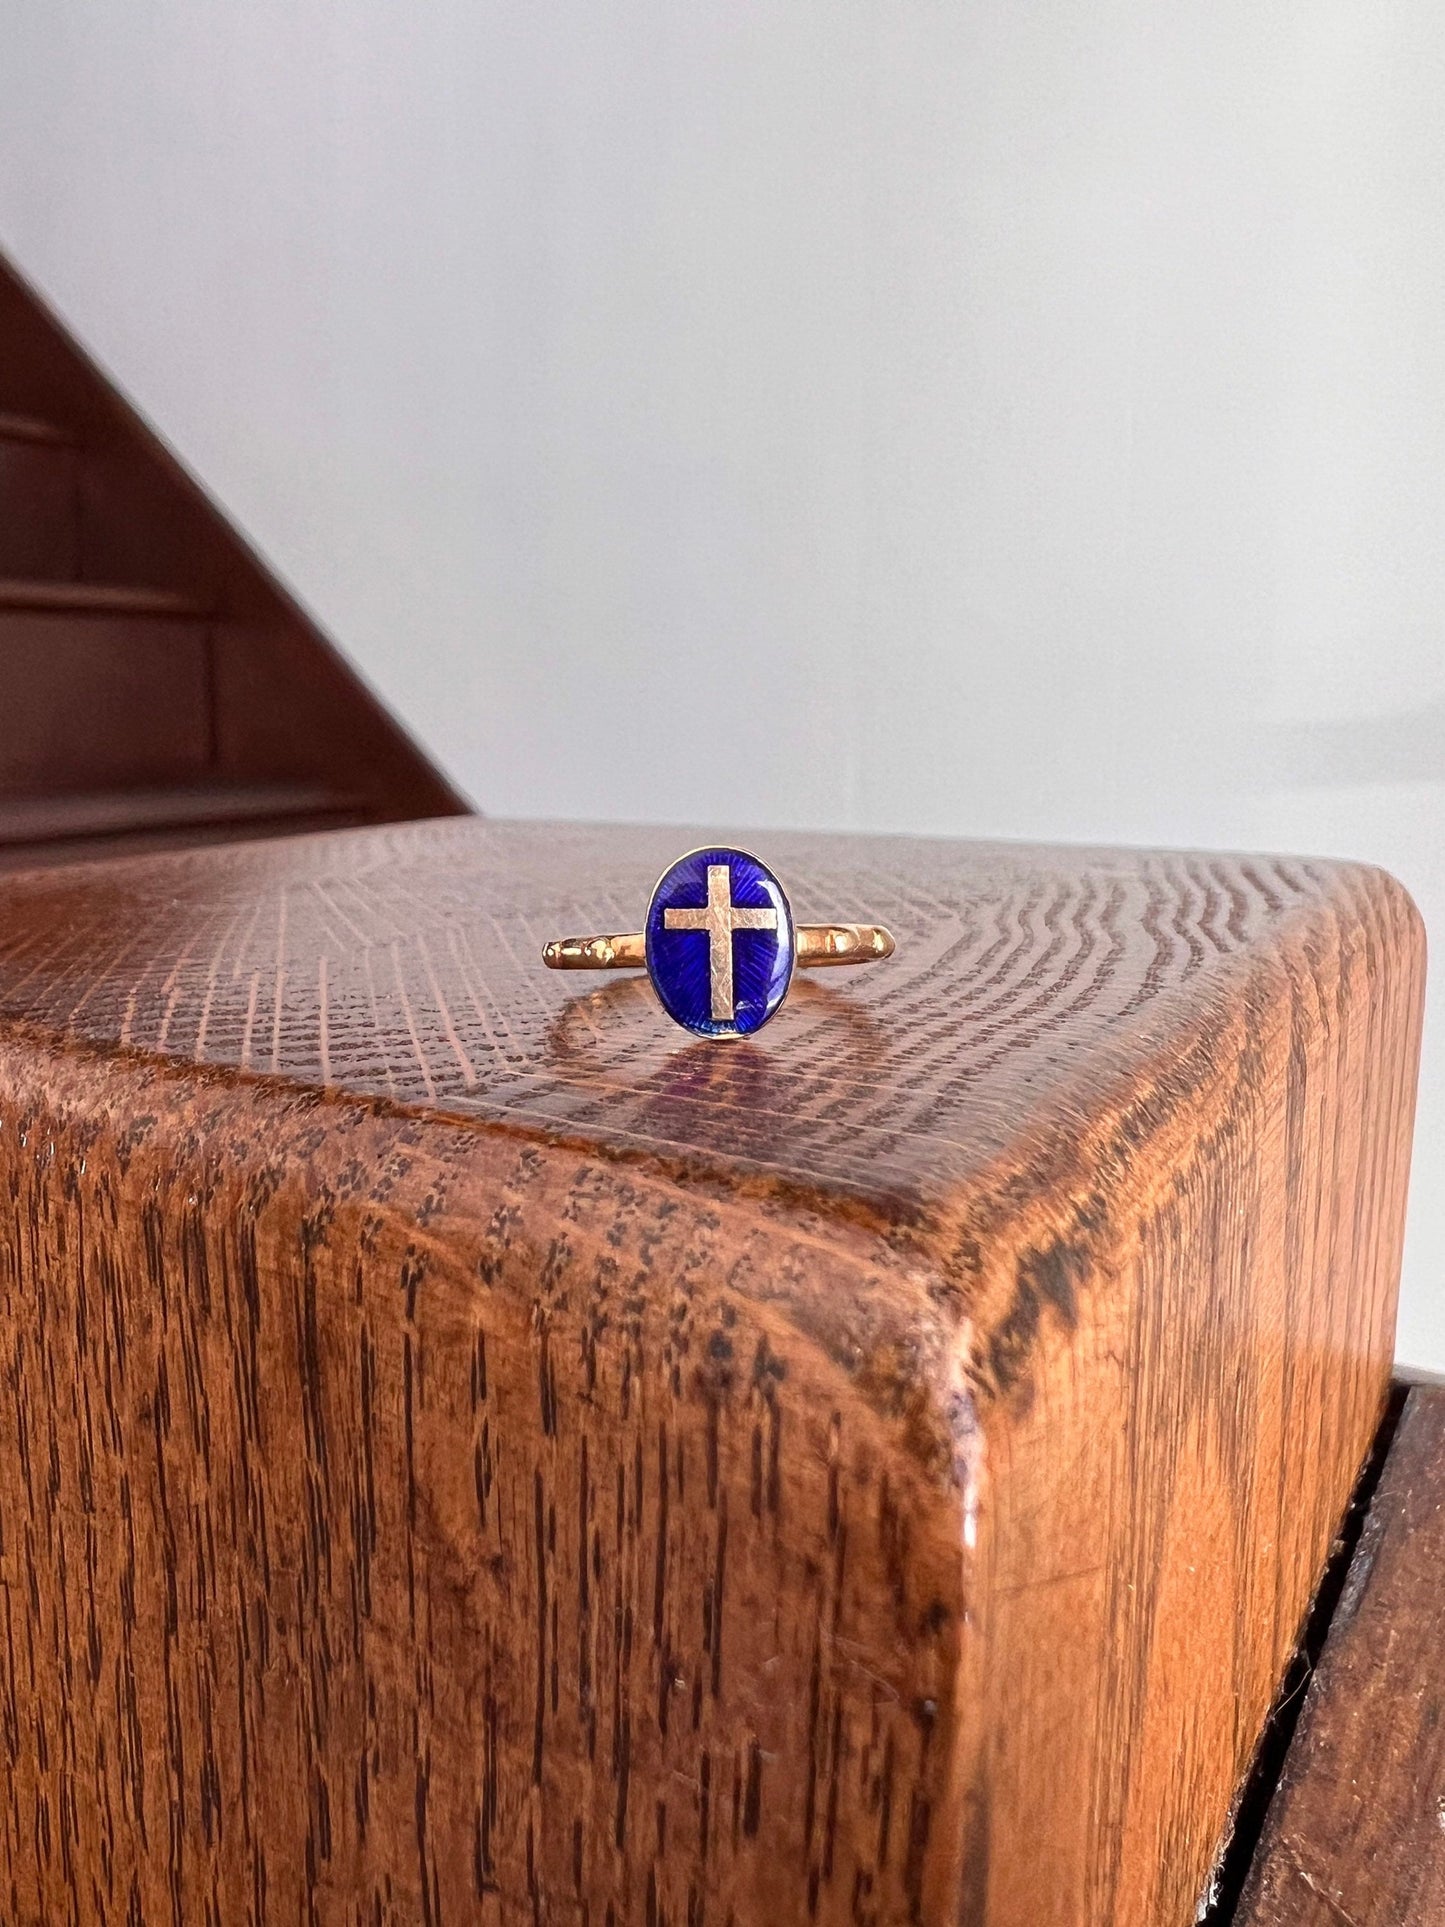 French VICTORIAN Antique ROSARY Ring 18k Gold Cobalt Blue ENAMEL Cross Riveted Stacker Band OOaK Gift Belle Epoque Religious Minimalist Rare